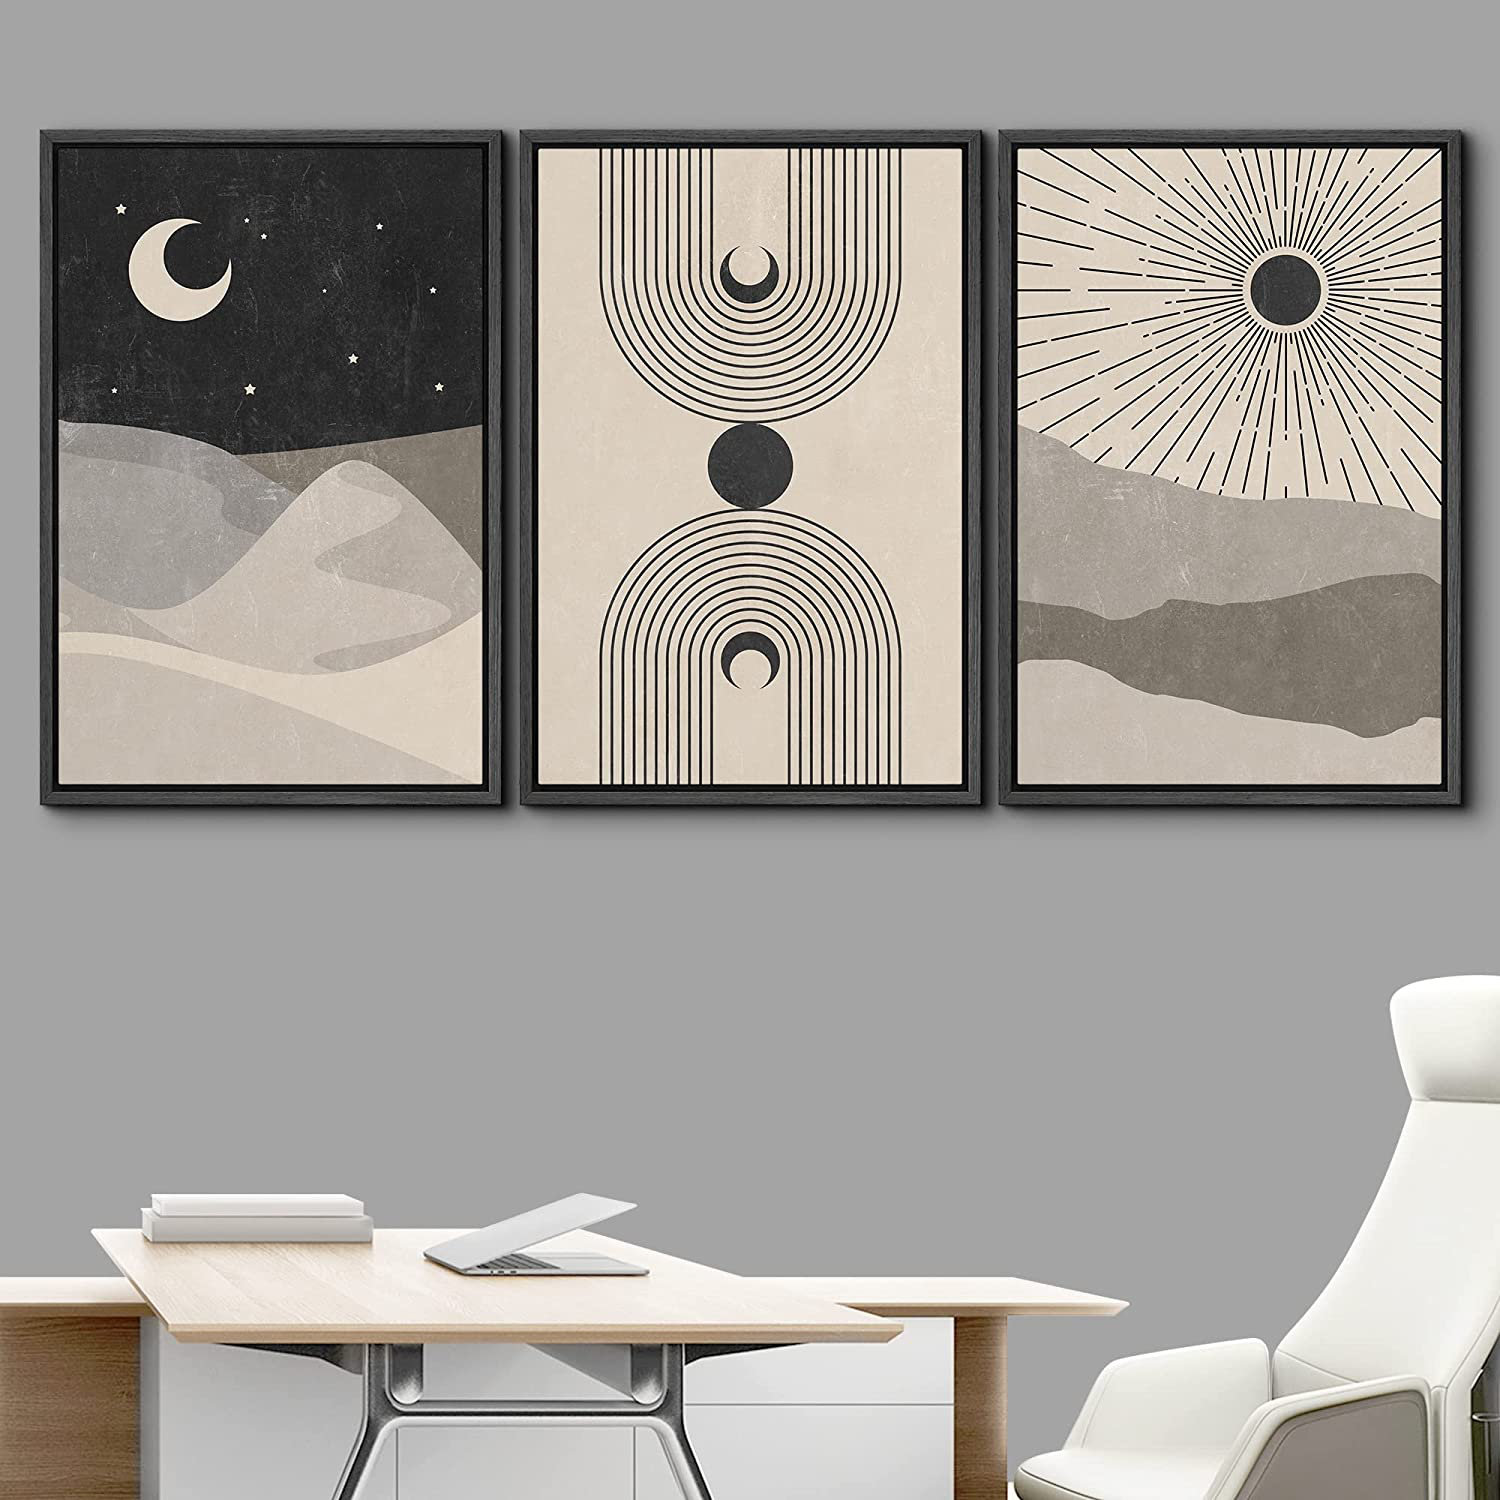 IDEA4WALL Minimalistic Landscape Moon Framed On Canvas 3 Pieces Print &  Reviews